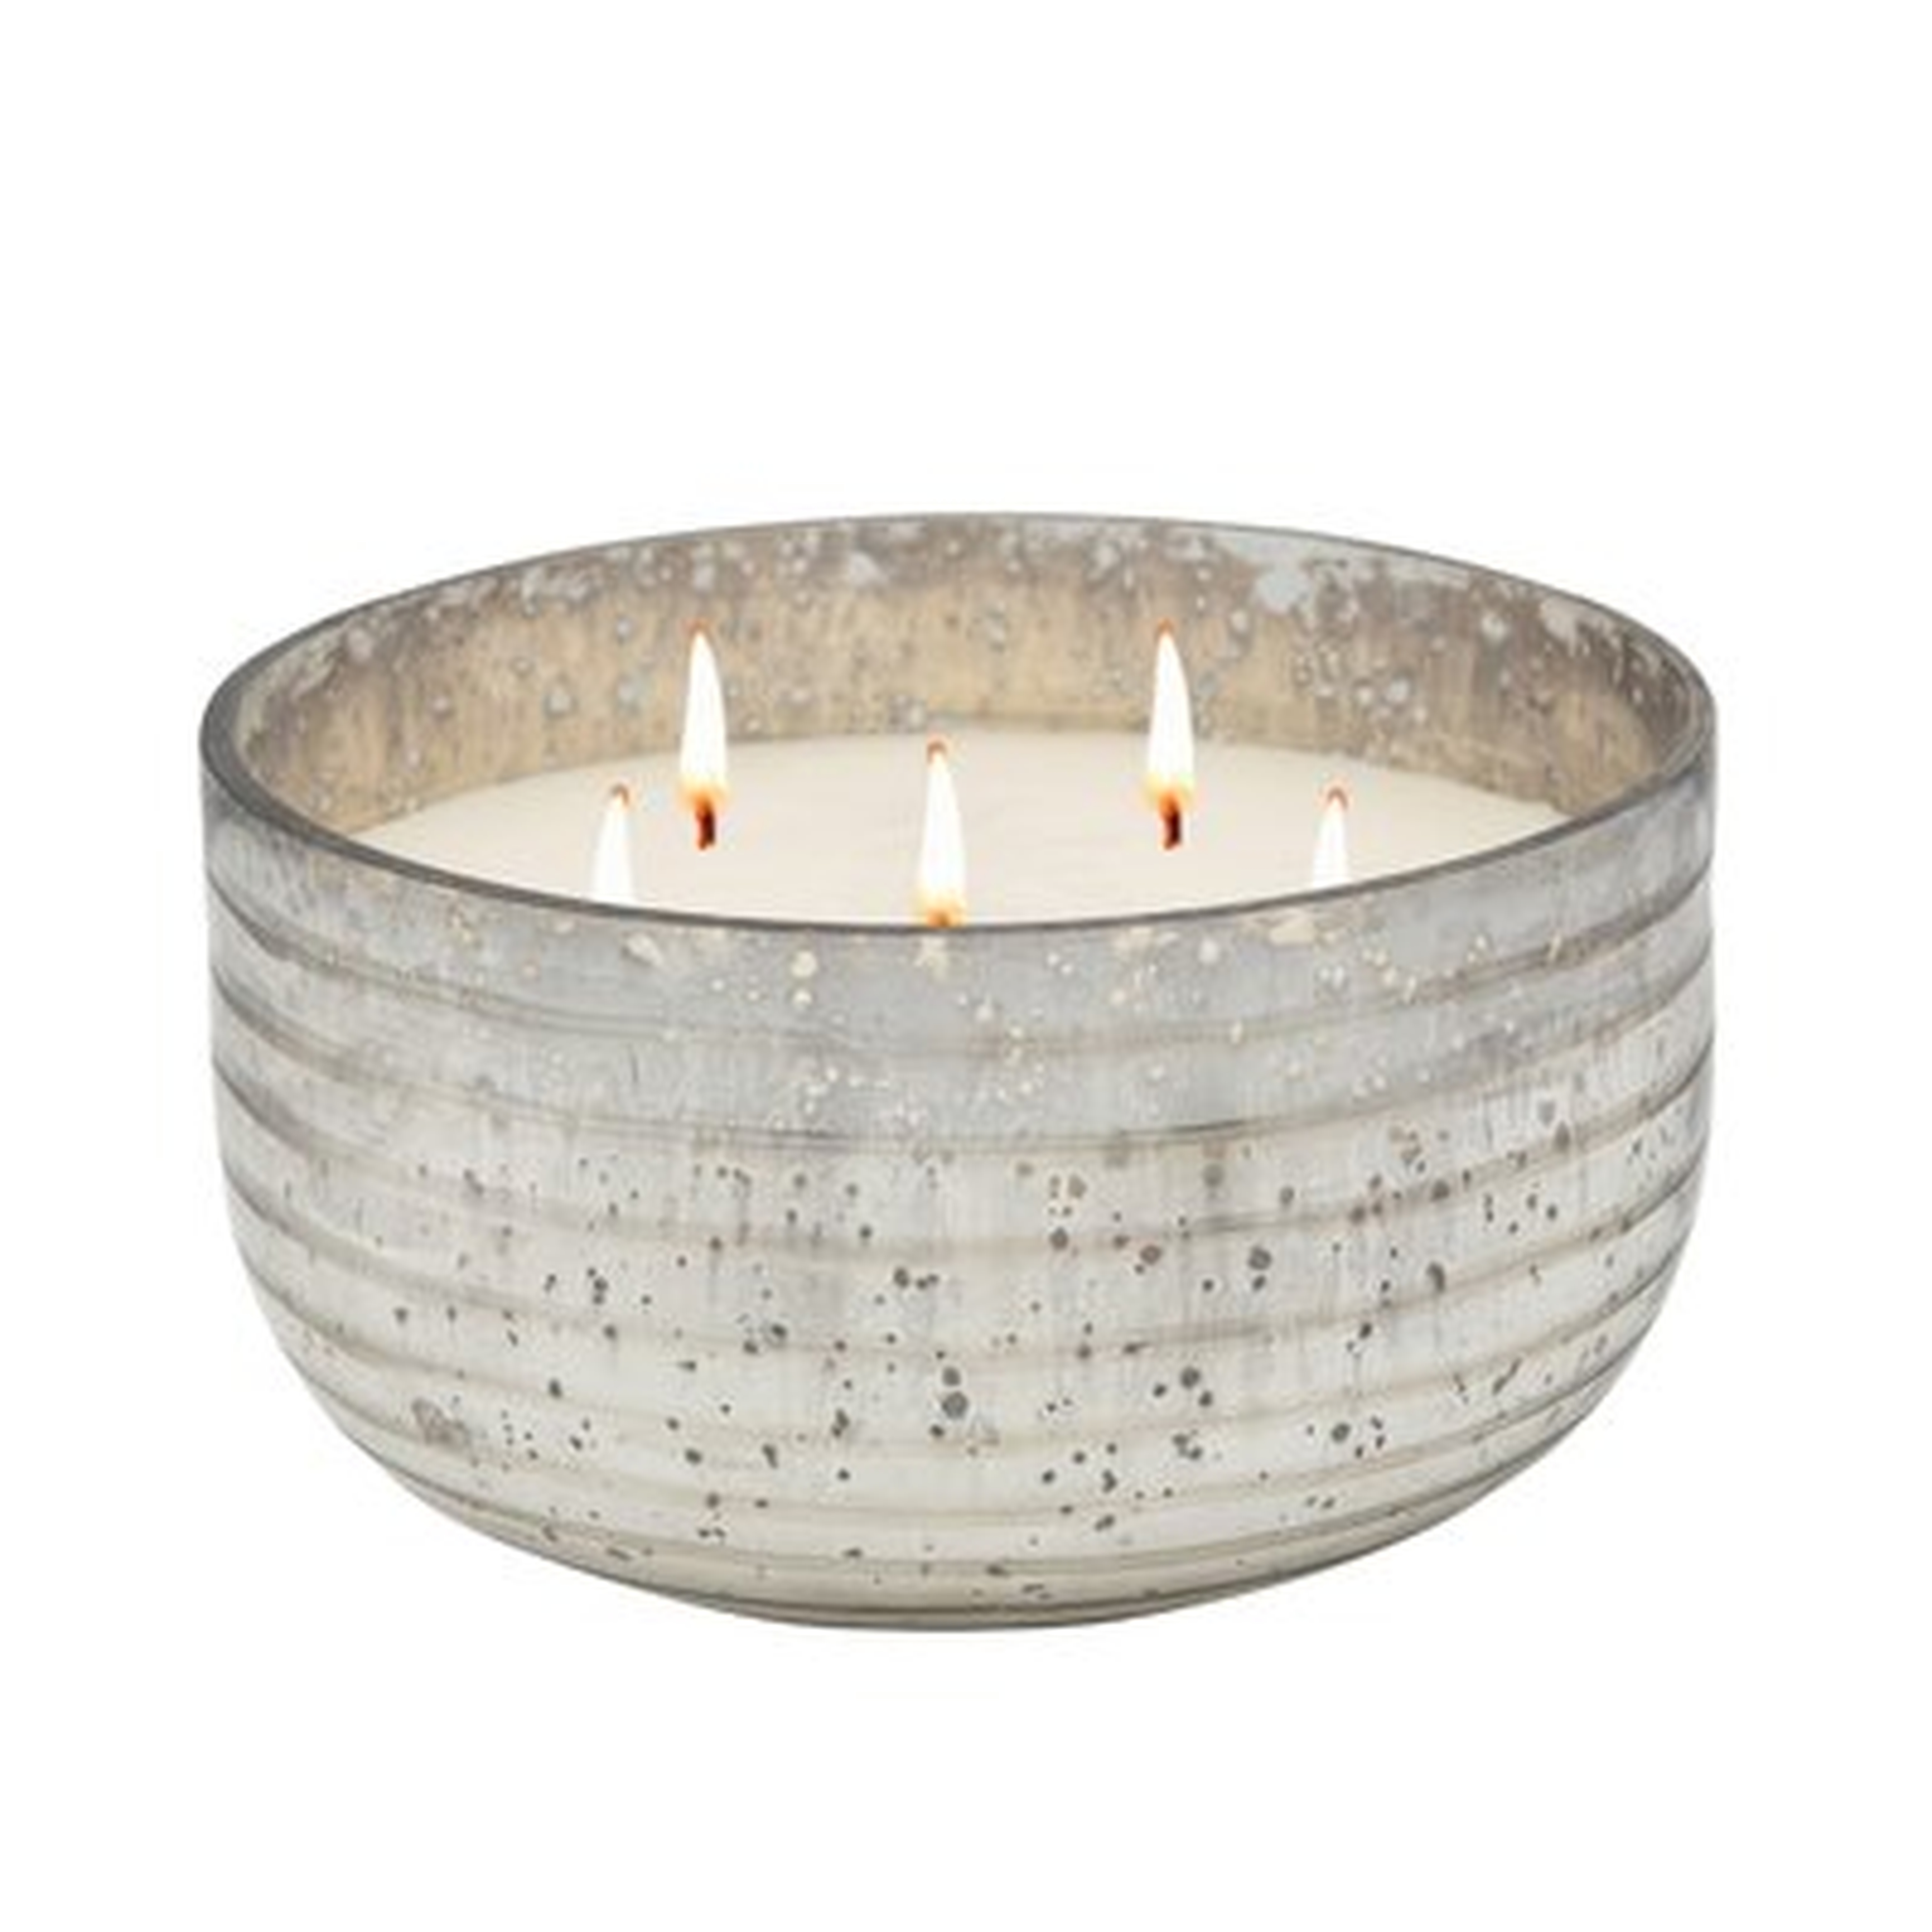 French Vanilla Scented Jar Candle - Wayfair